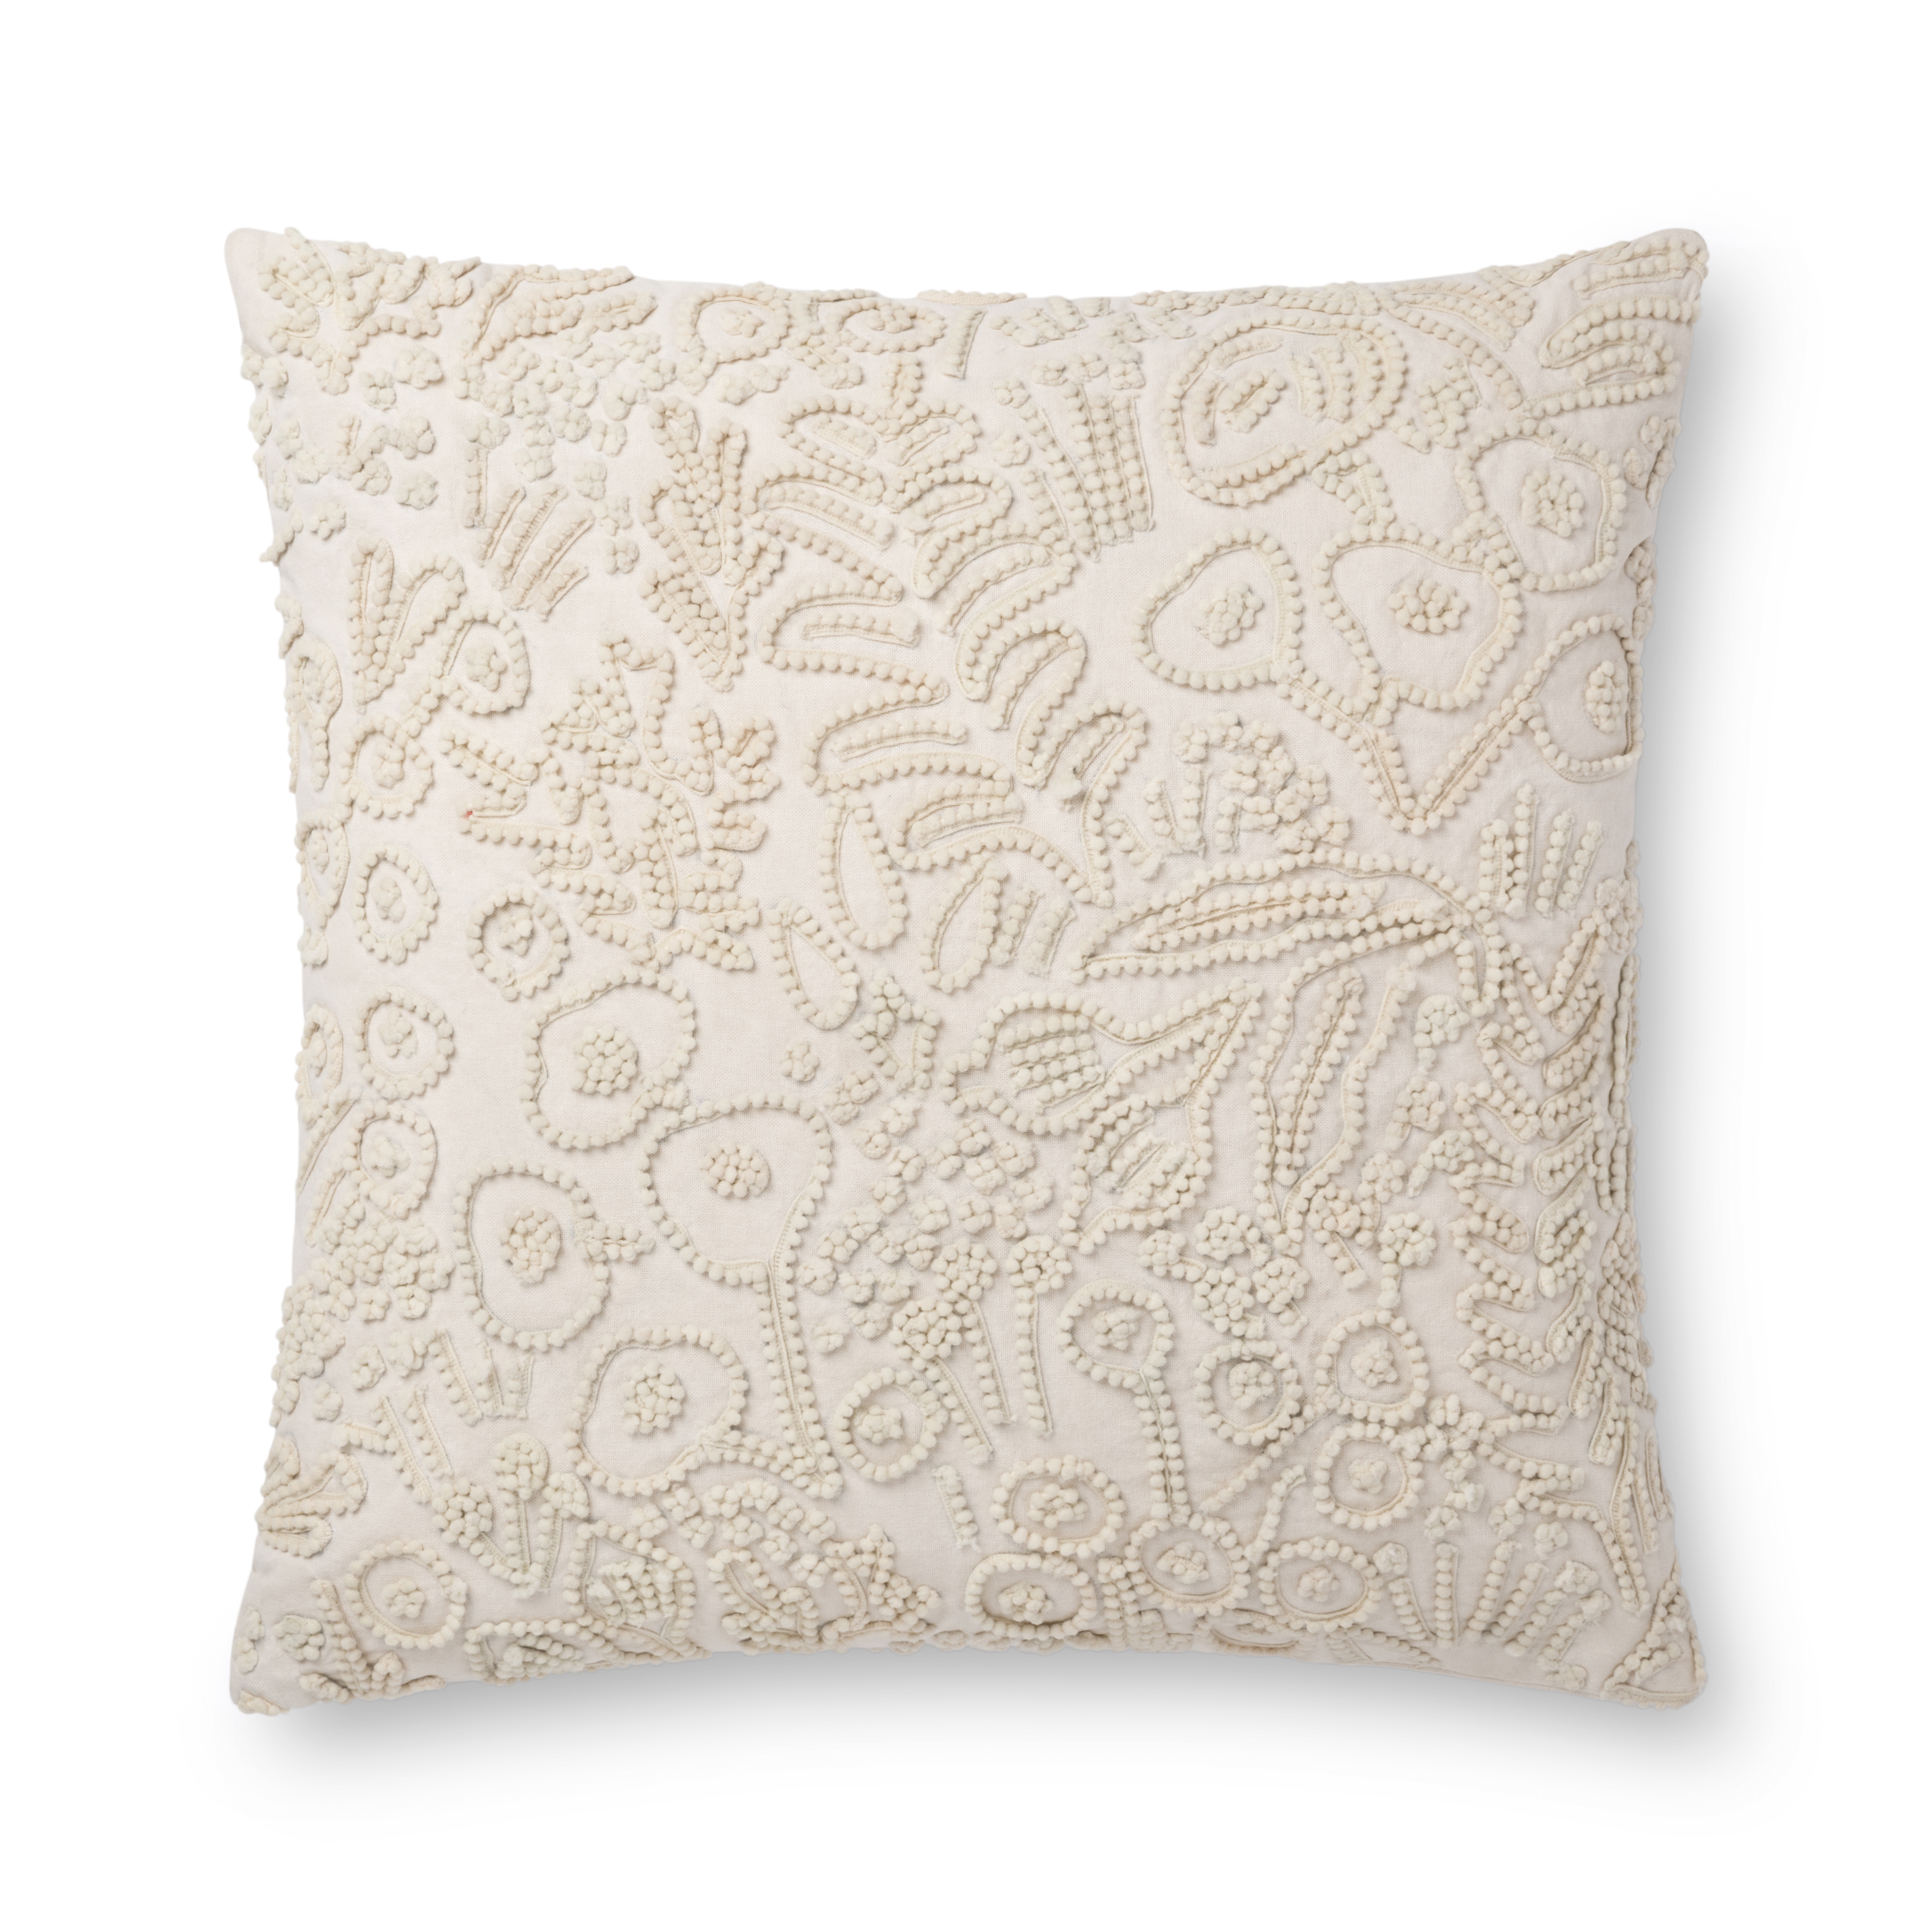 Floral Throw Pillow Cover, 22" x 22", Ivory - Image 1